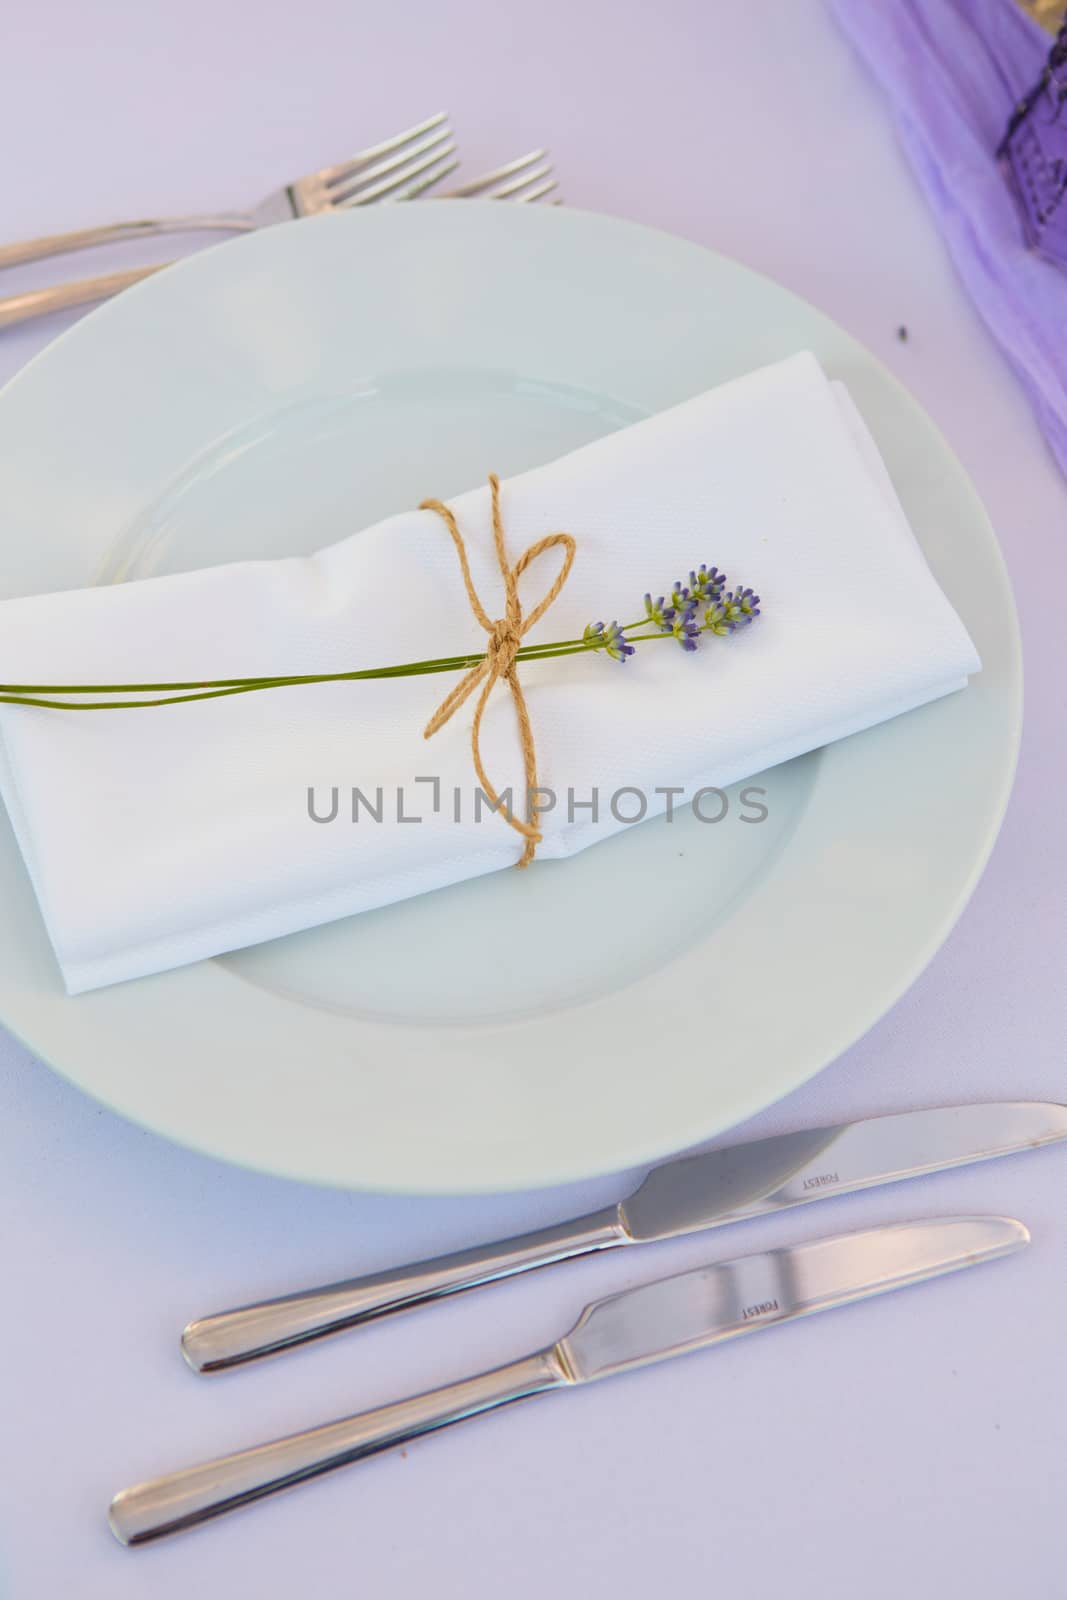 Elegant table setting for wedding engagement Easter dinner with white ceramic plates cotton napkin tied with twine lavender flowers candles. Provence style by sarymsakov